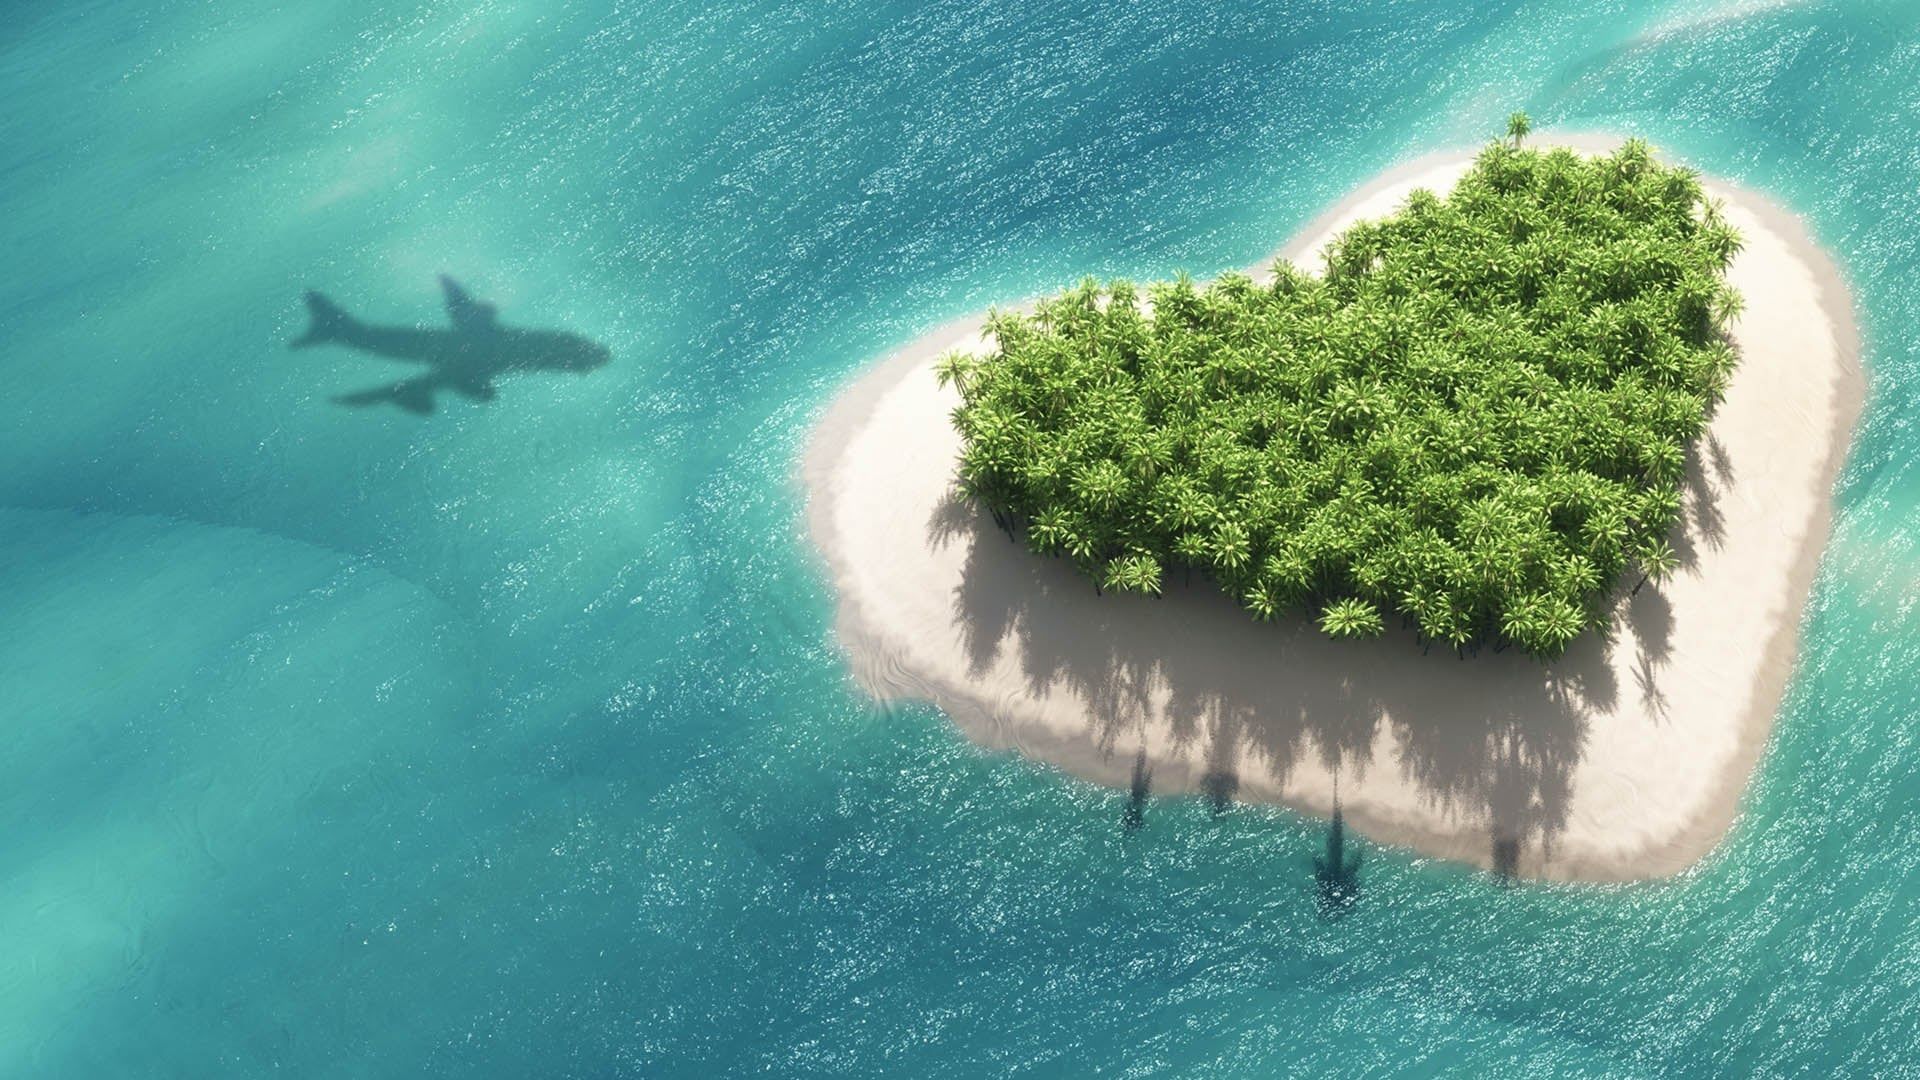 Love at First Flight background